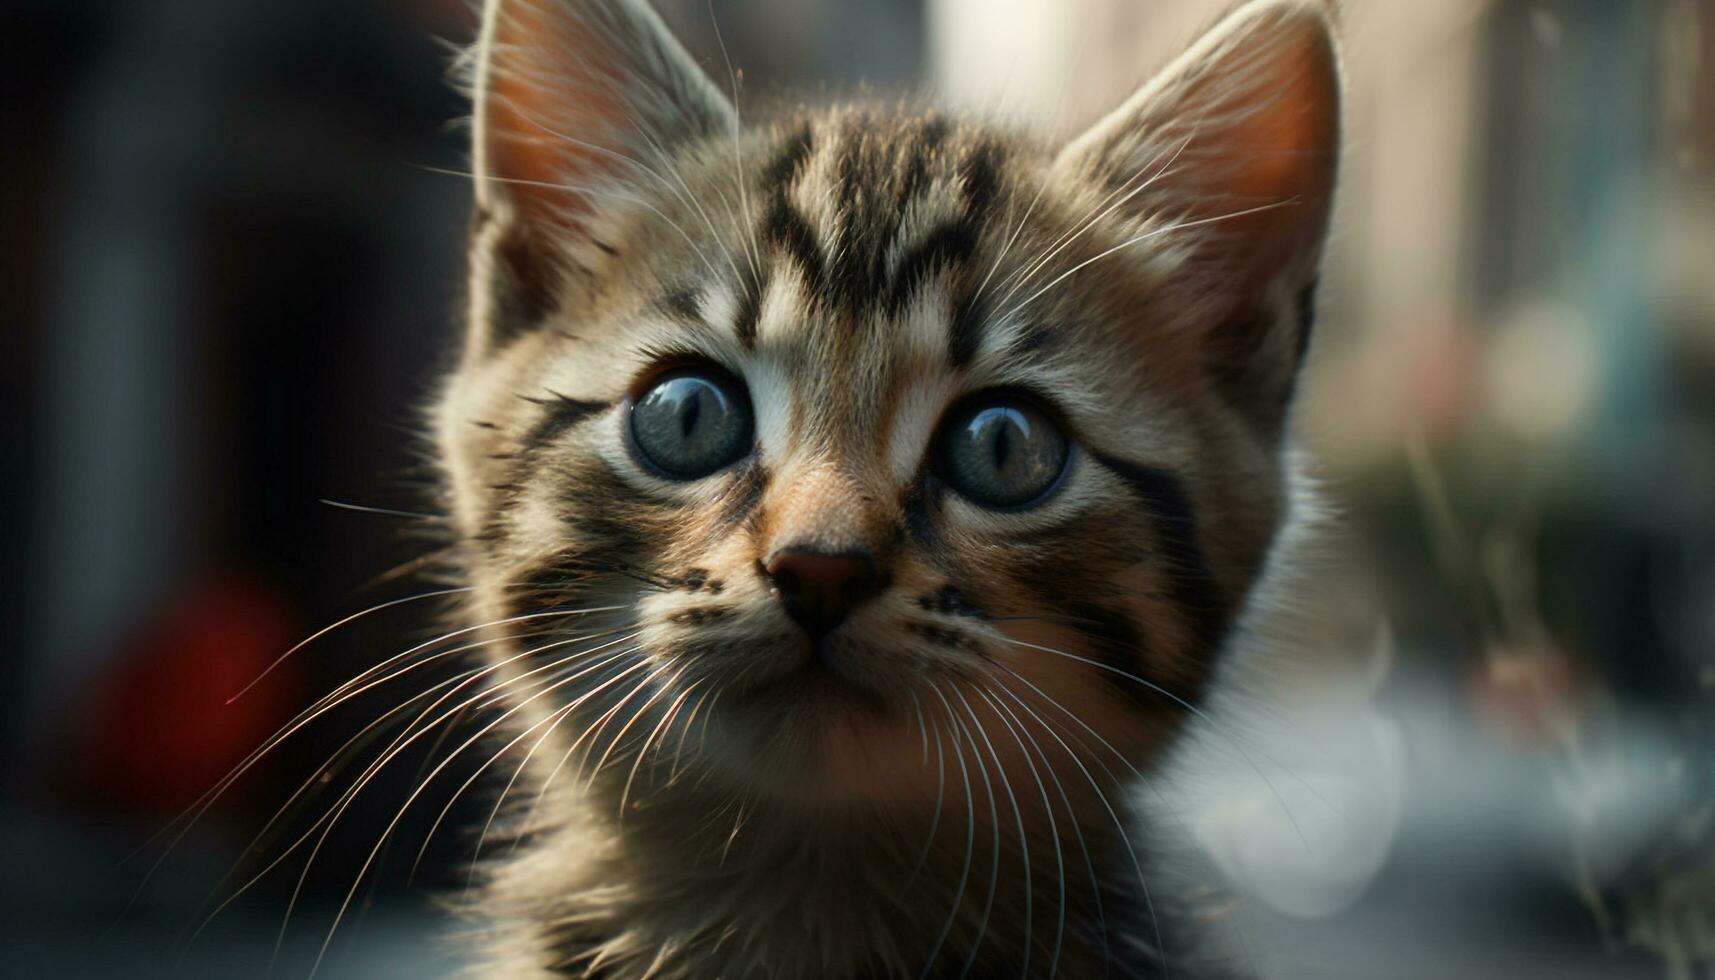 Cute kitten sitting indoors, staring at camera through window generated by AI photo